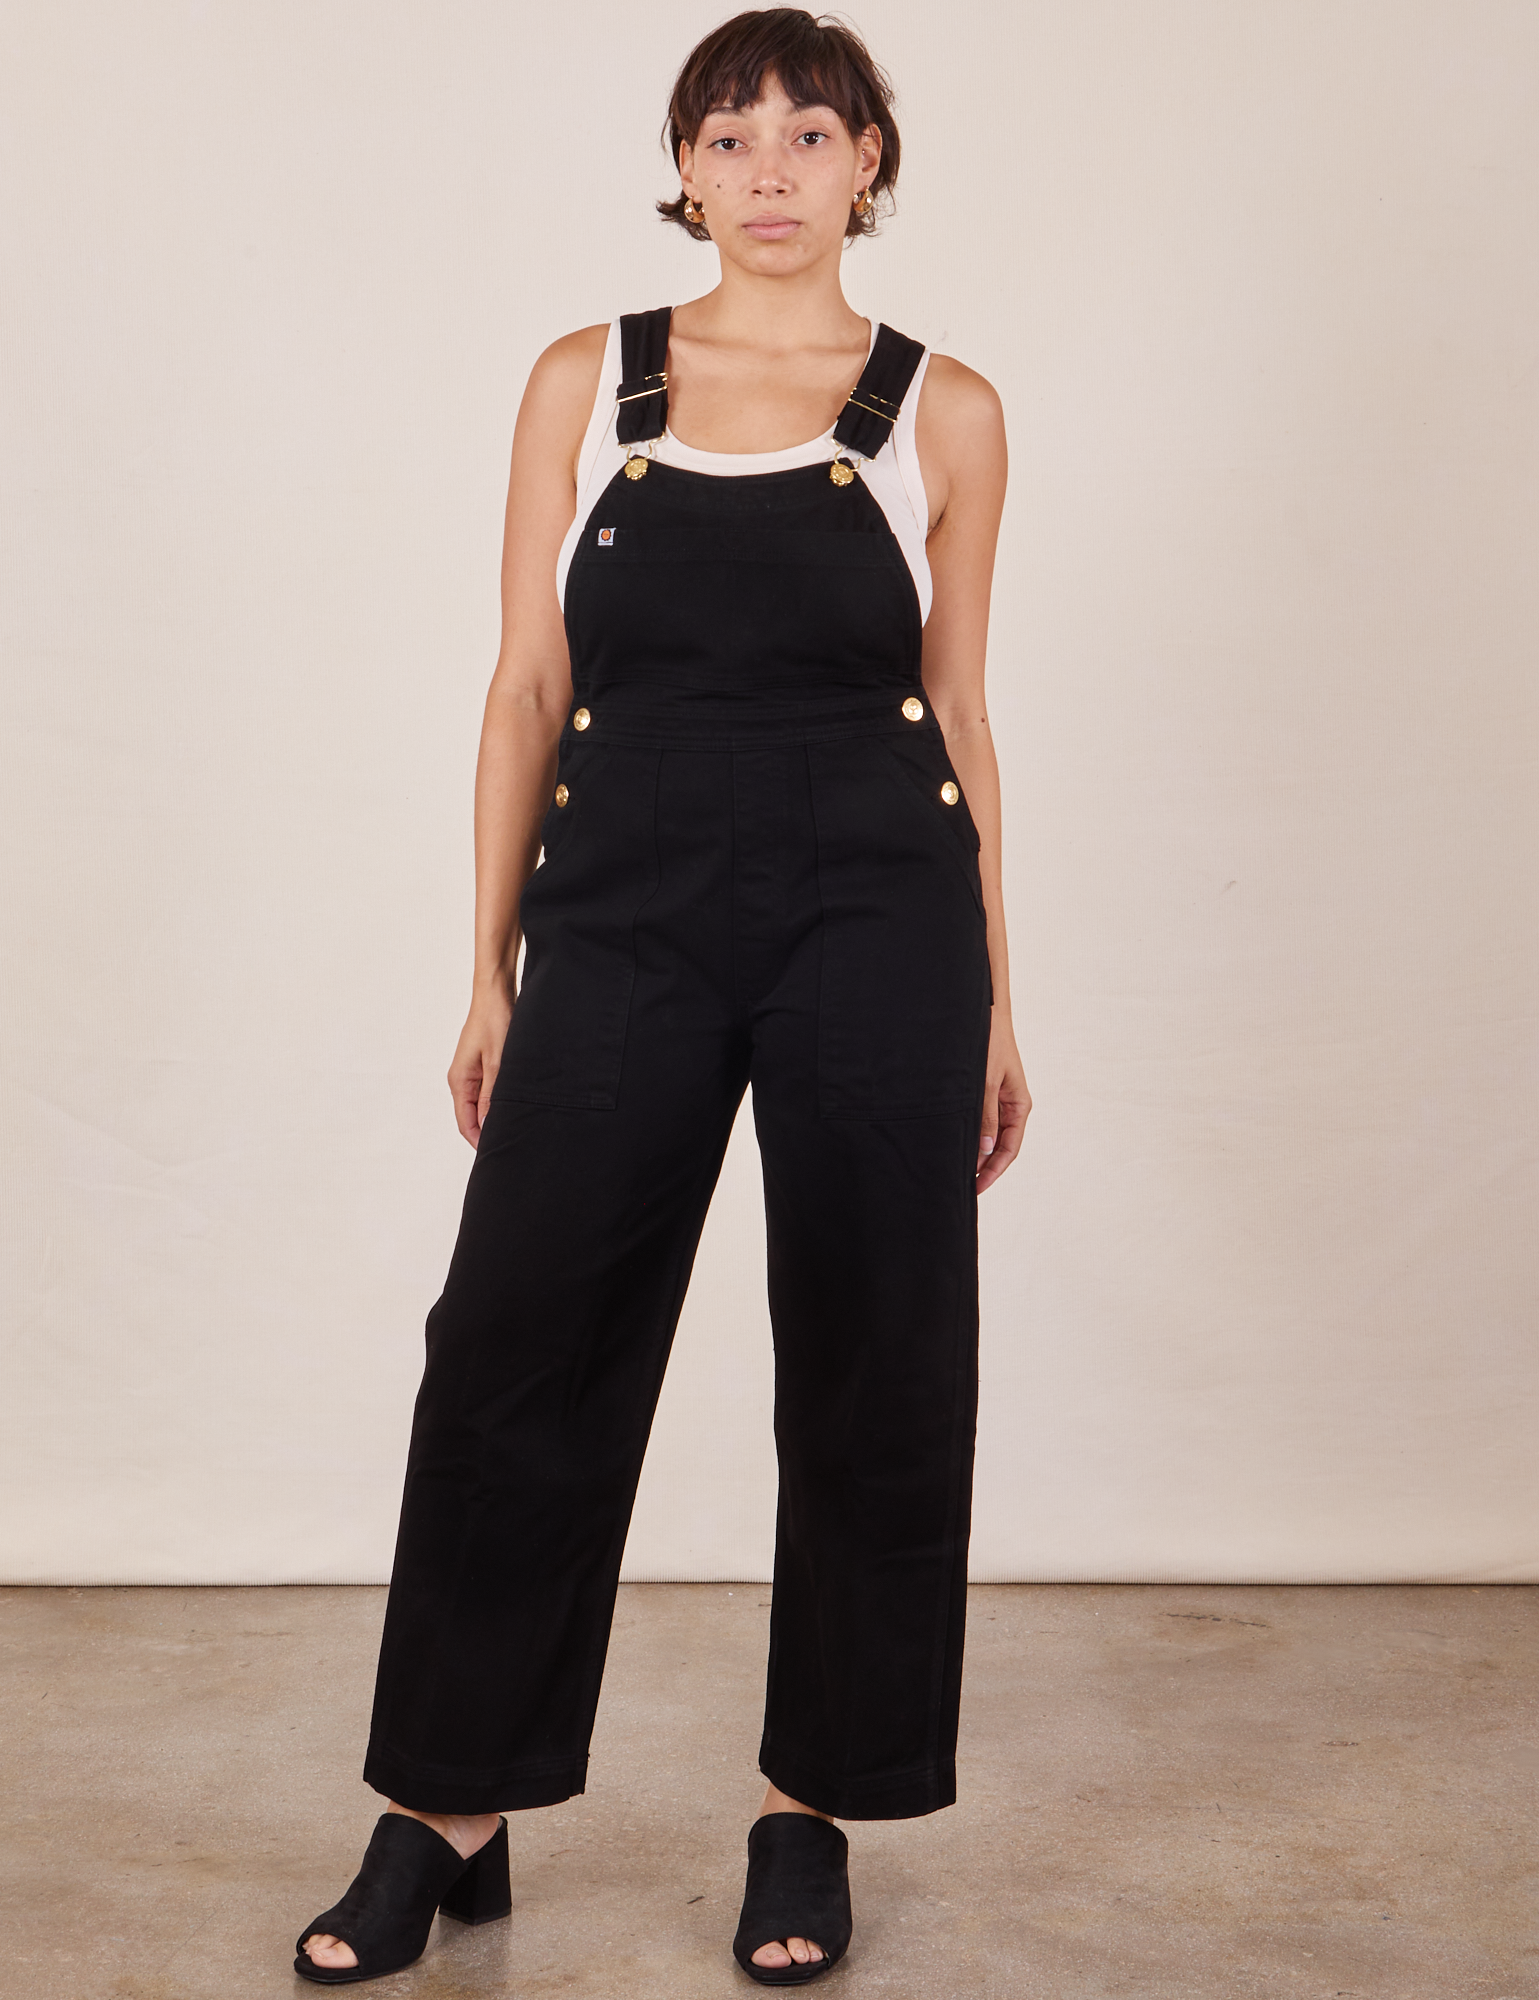 Tiara is 5'4" and wearing size XS Original Overalls in Mono Black with a vintage off-white Cropped Tank Top underneath.